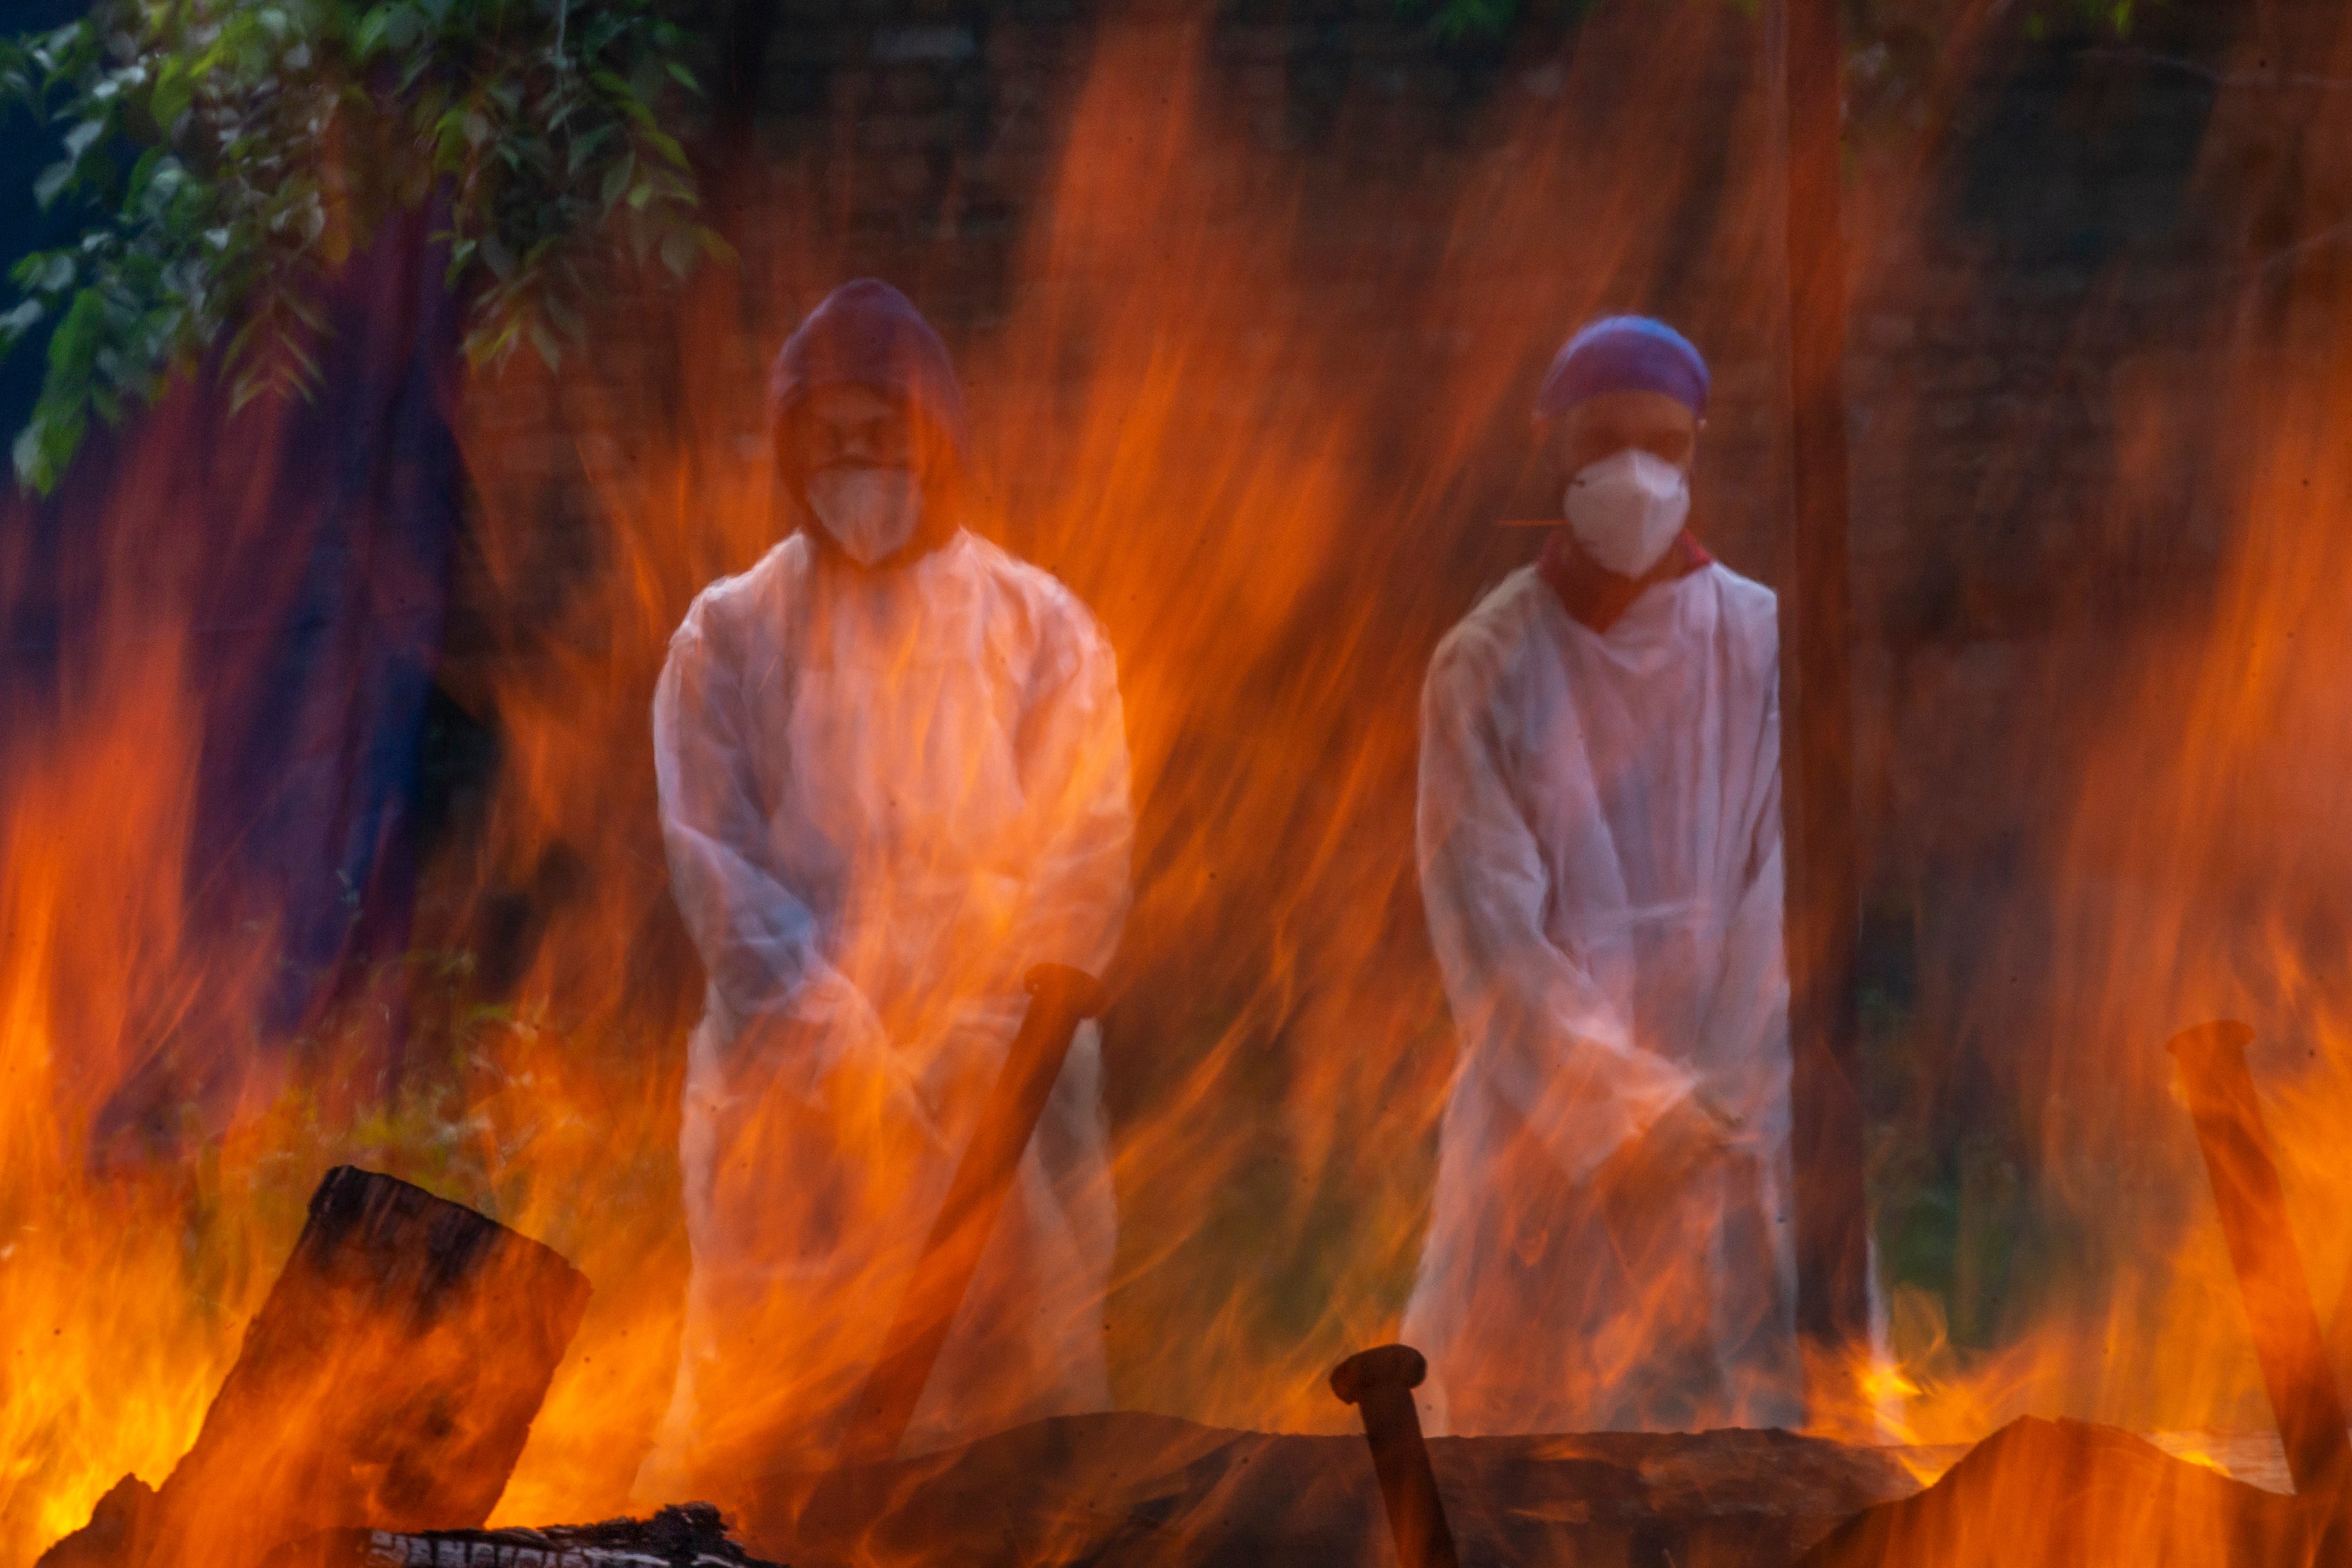 <p>Relatives in protective suits stand next to the burning pyre of a person who died of Covid at a Srinagar crematorium</p>